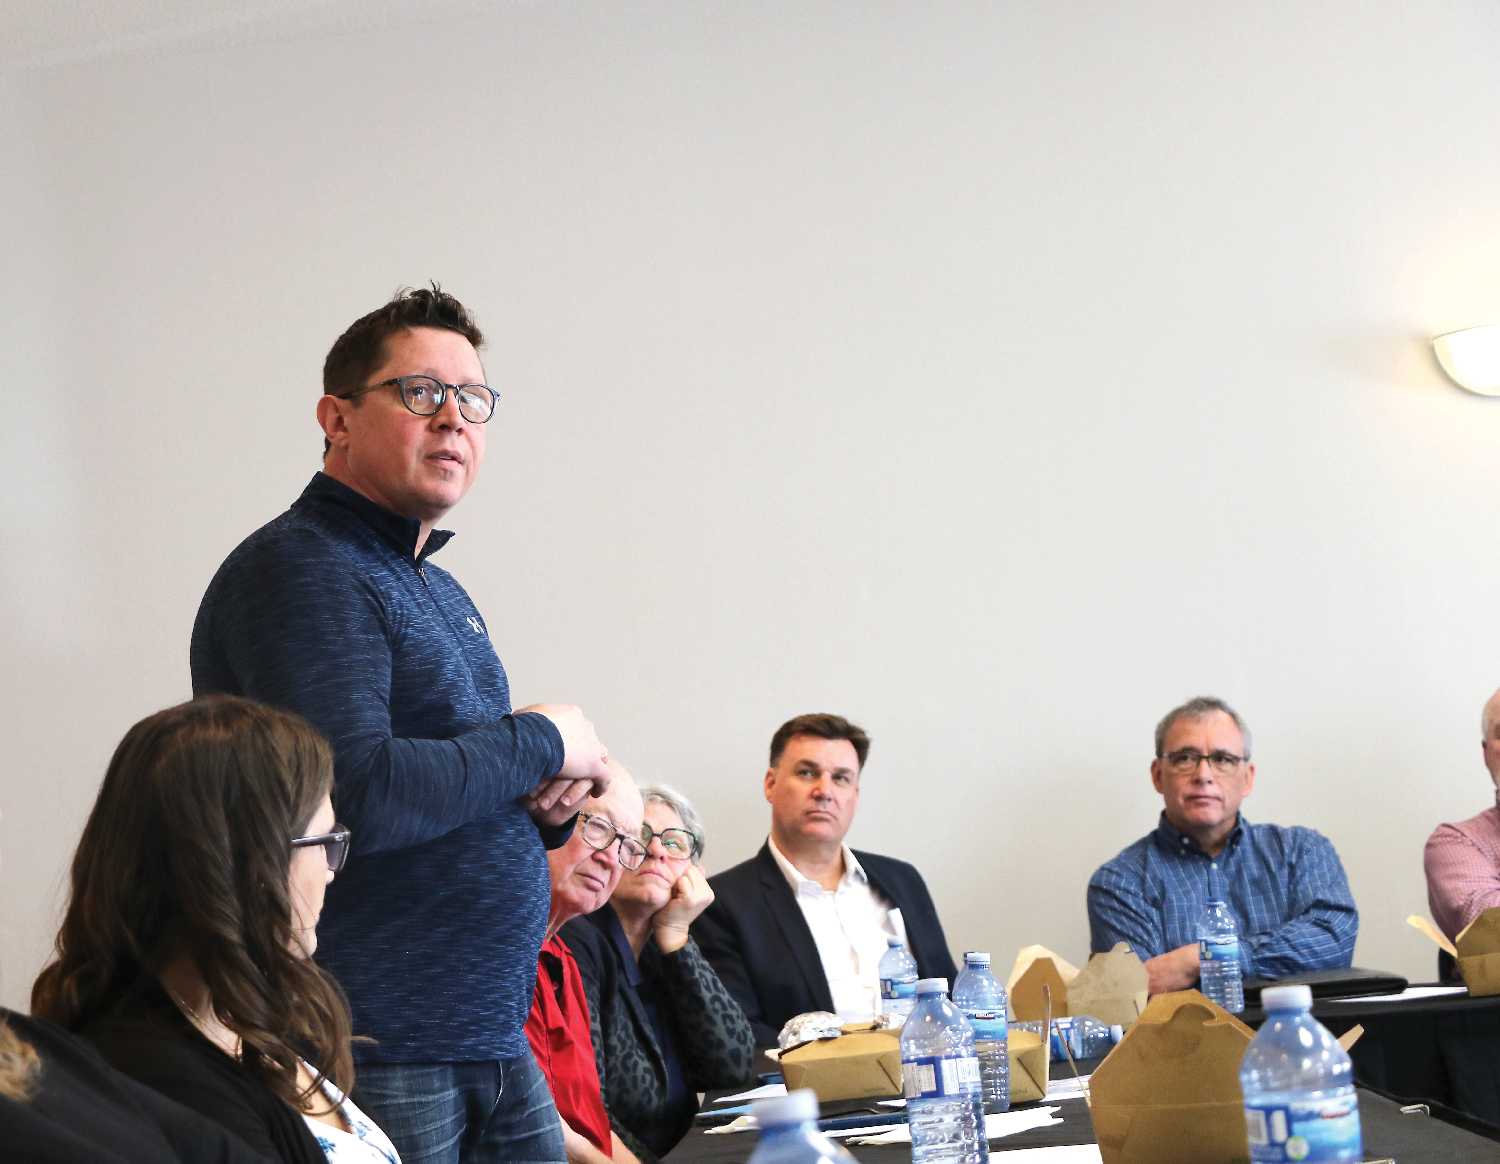 At the April 26 Chamber meeting, Roman Chernykh informed members on how the money fundraised for Ukrainian refugees have directly helped individuals and families who are still in Ukraine.